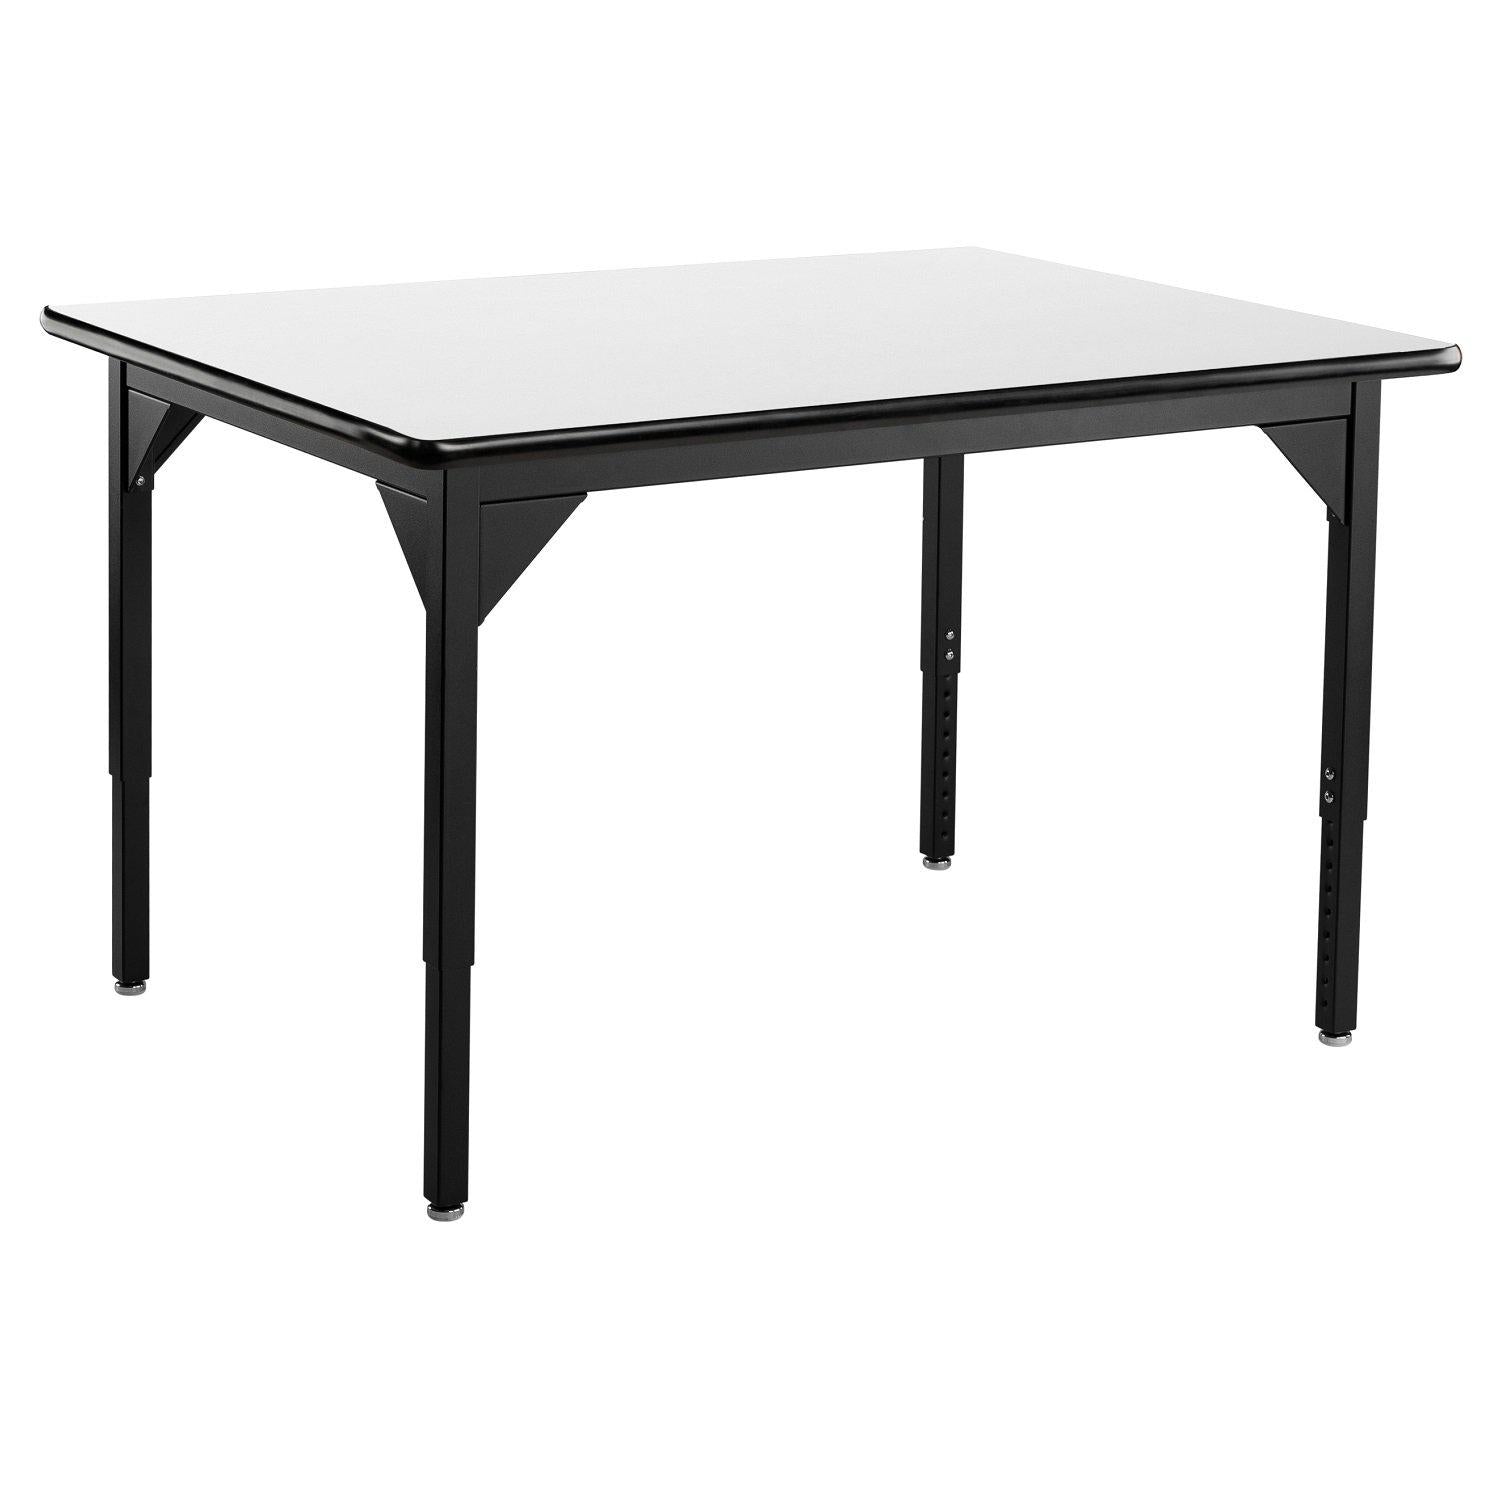 Heavy-Duty Height-Adjustable Utility Table, Black Frame, 36" x 42", Whiteboard High-Pressure Laminate Top